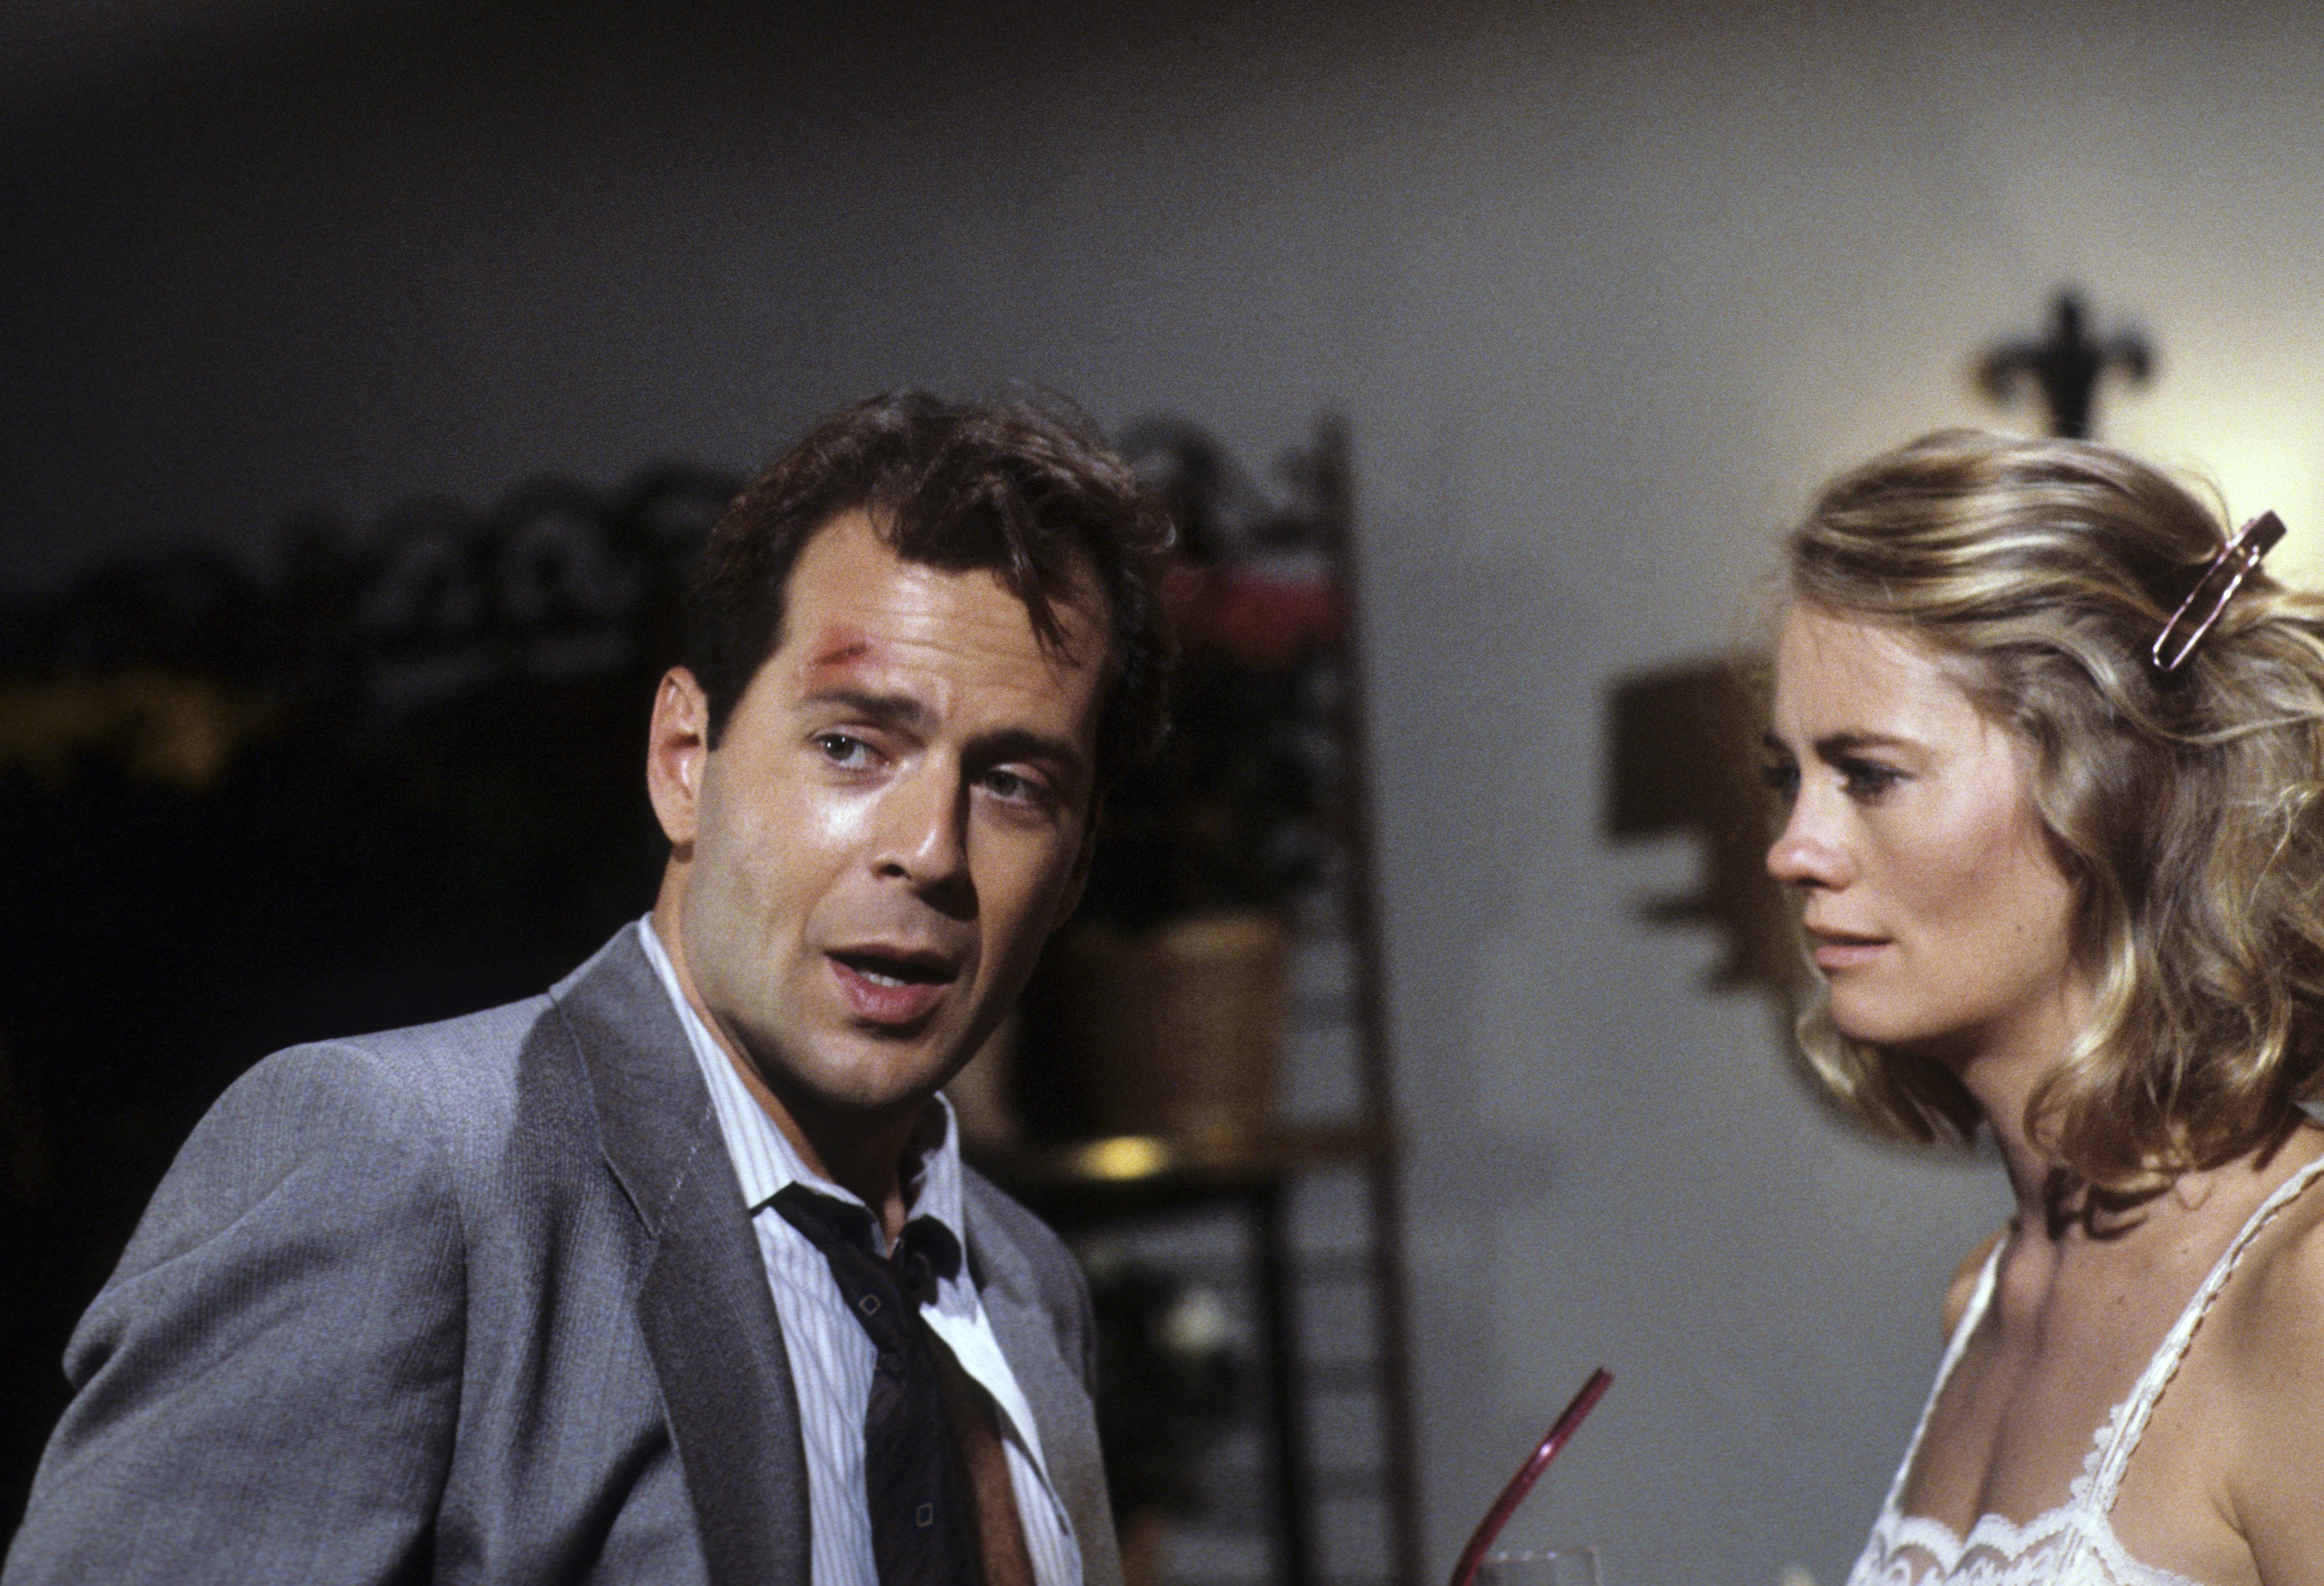 Bruce Willis starring in "Moonlighting" 1985. | Source: Getty Images